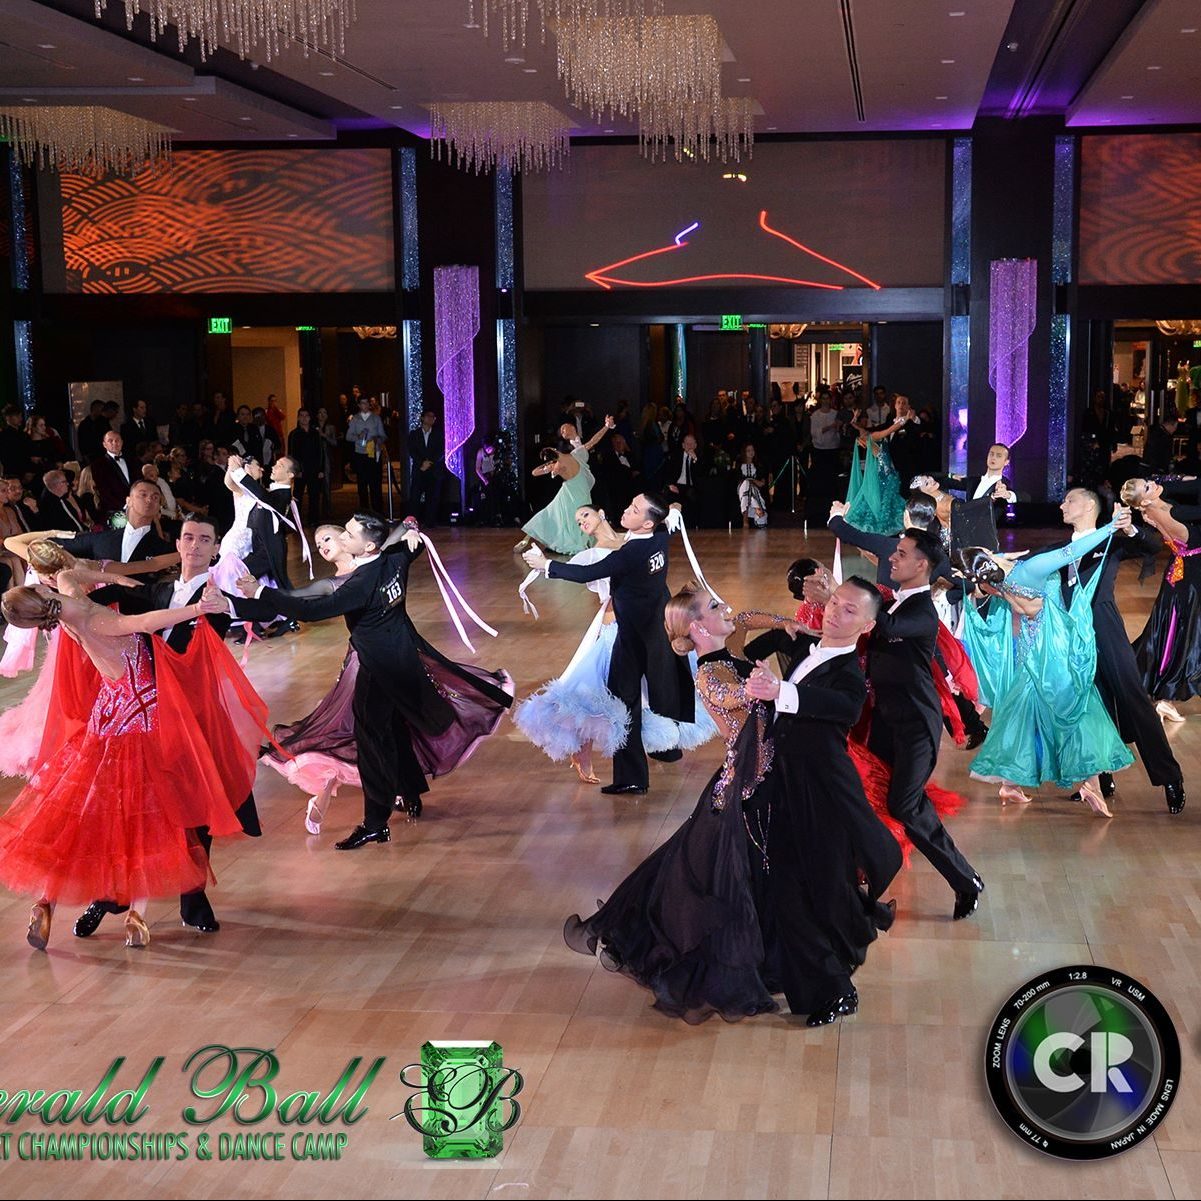 First Ballroom Dance Competition: Checklist to Success.